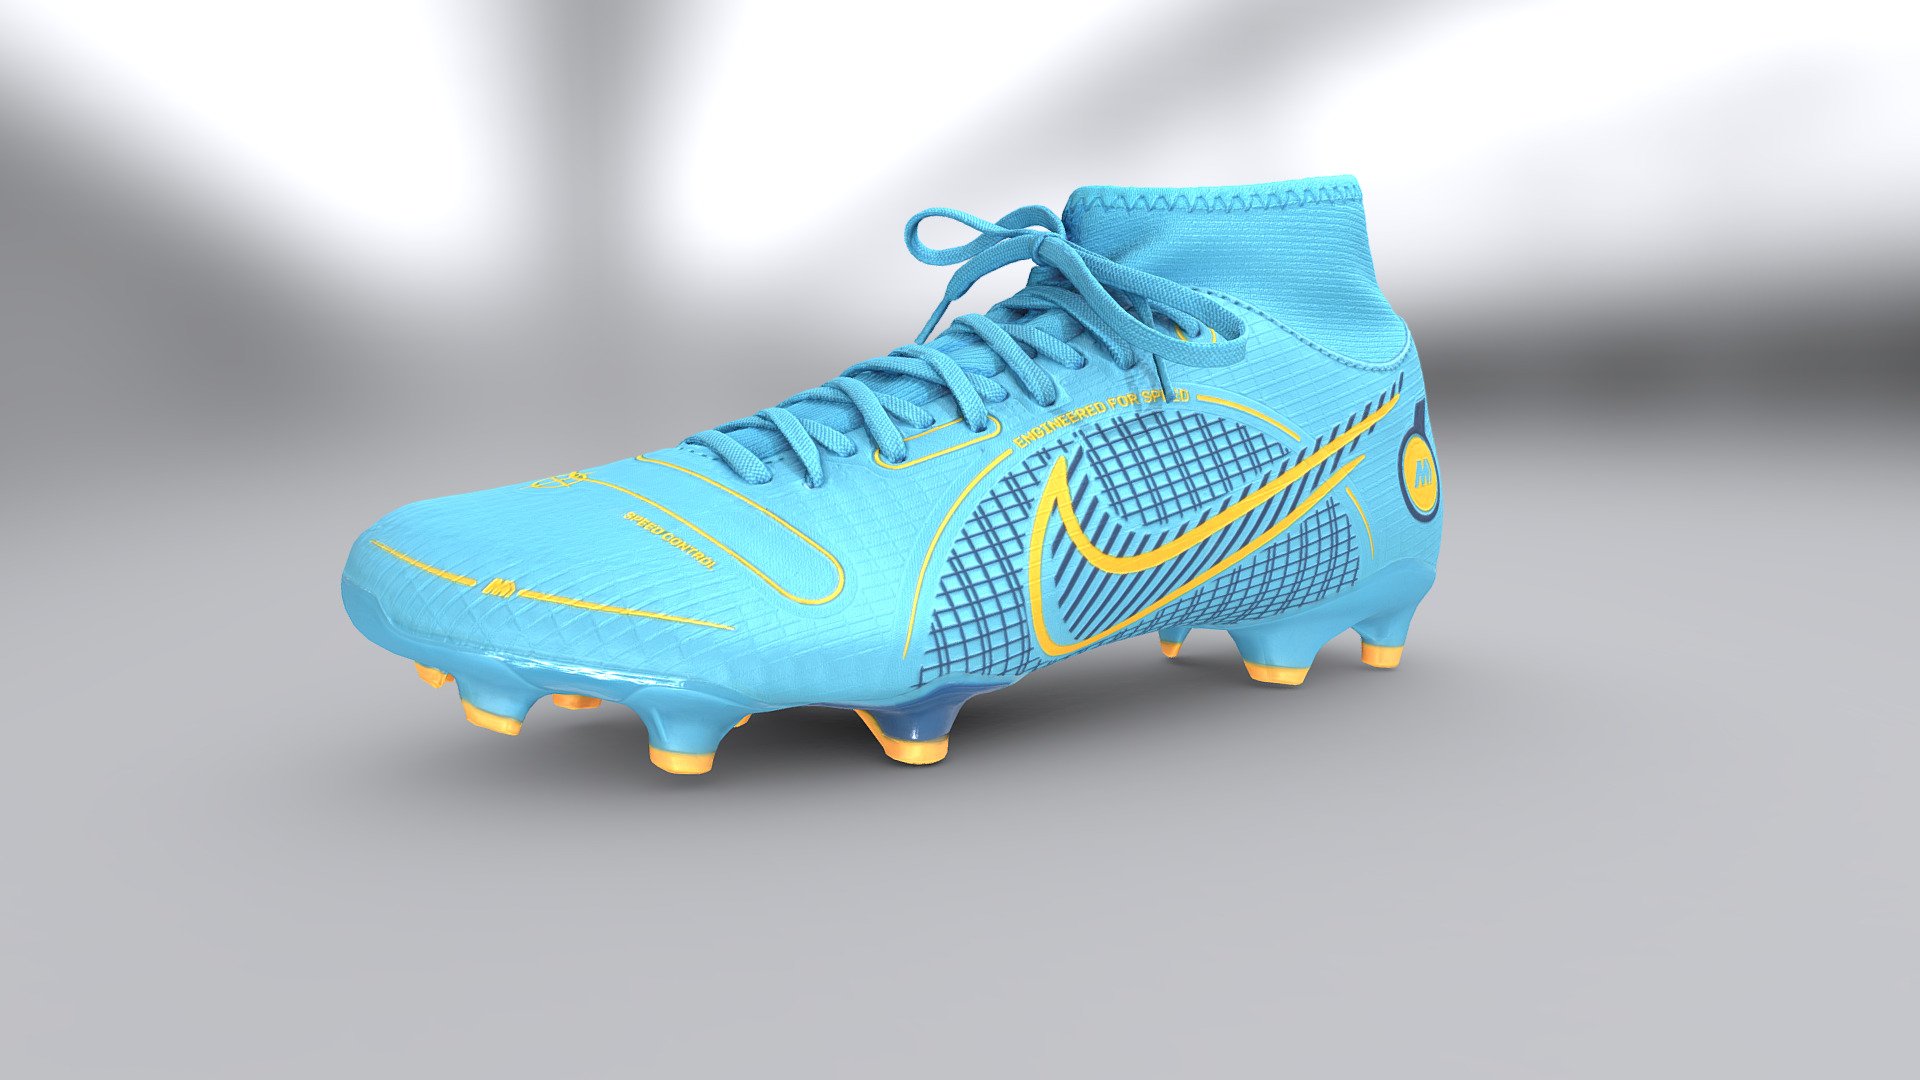 Realistic high detailed model of football boots with high resolution textures. Model created by our unique semi-automatic scanning technology

Optimized for 3D web and AR / VR

=======FEATURES===========

The units of measurement during the creation process were milimeters.
Clean and optimized topology is used for maximum polygon efficiency.
This model consists of 1 meshes.
All objects have fully unwrapped UVs.
The model has 1 material
Includes high detailed normal map

Includes High detail 4096x4096 .png textures (diffuse (base color), Roughness, Metallness, Normal) 
80k polygons - Nike Performance MERCURIAL 8 ACADEMY - Buy Royalty Free 3D model by VRModelFactory 3d model